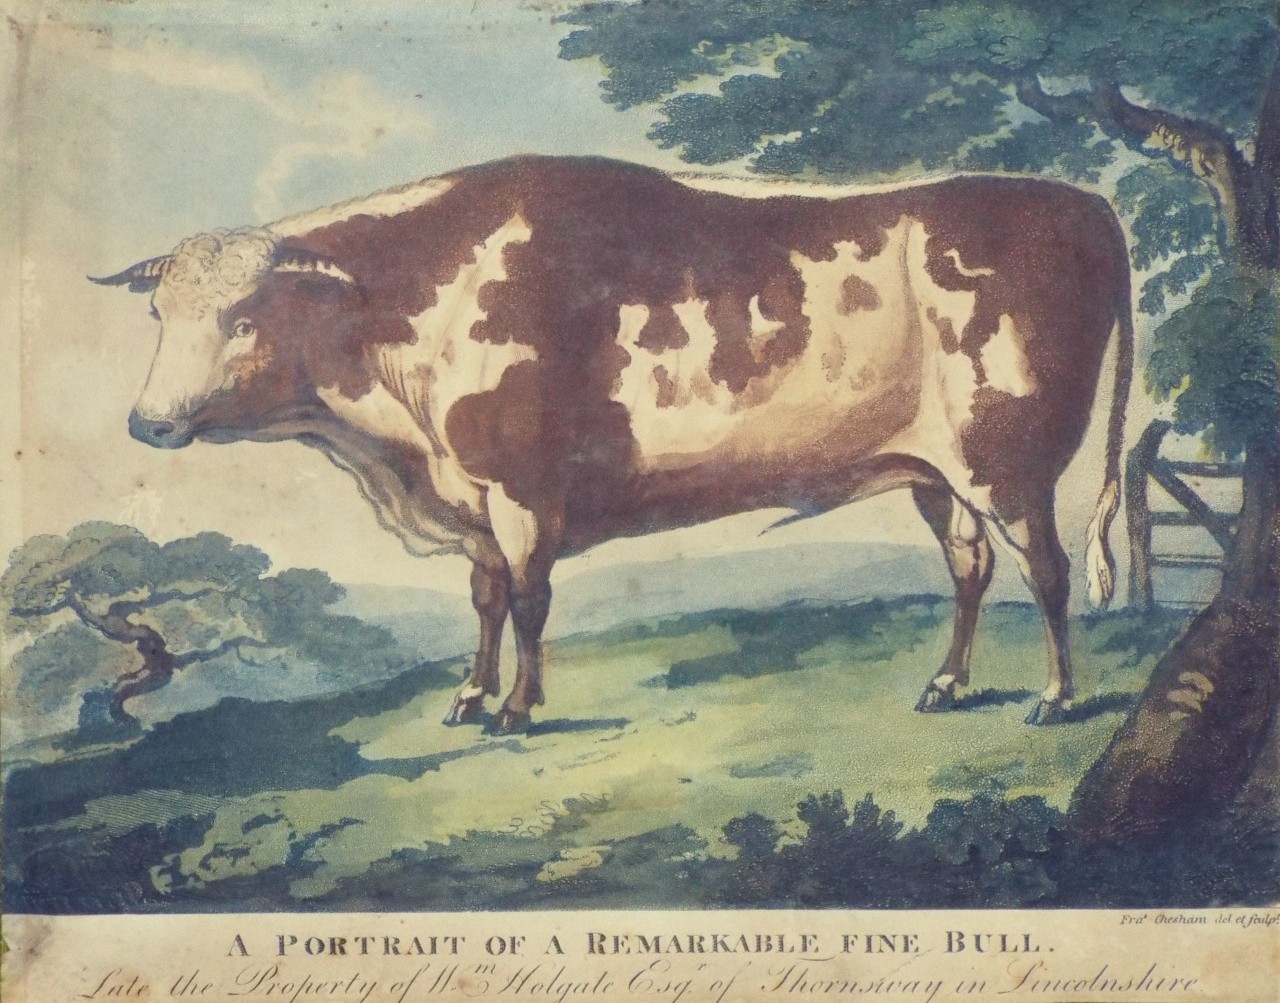 Aquatint - A Portrait of a Remarkable Fine Bull. Late the Property of Wm. Holgate Esq. of Thornsway in Lincolnshire. - Chesham